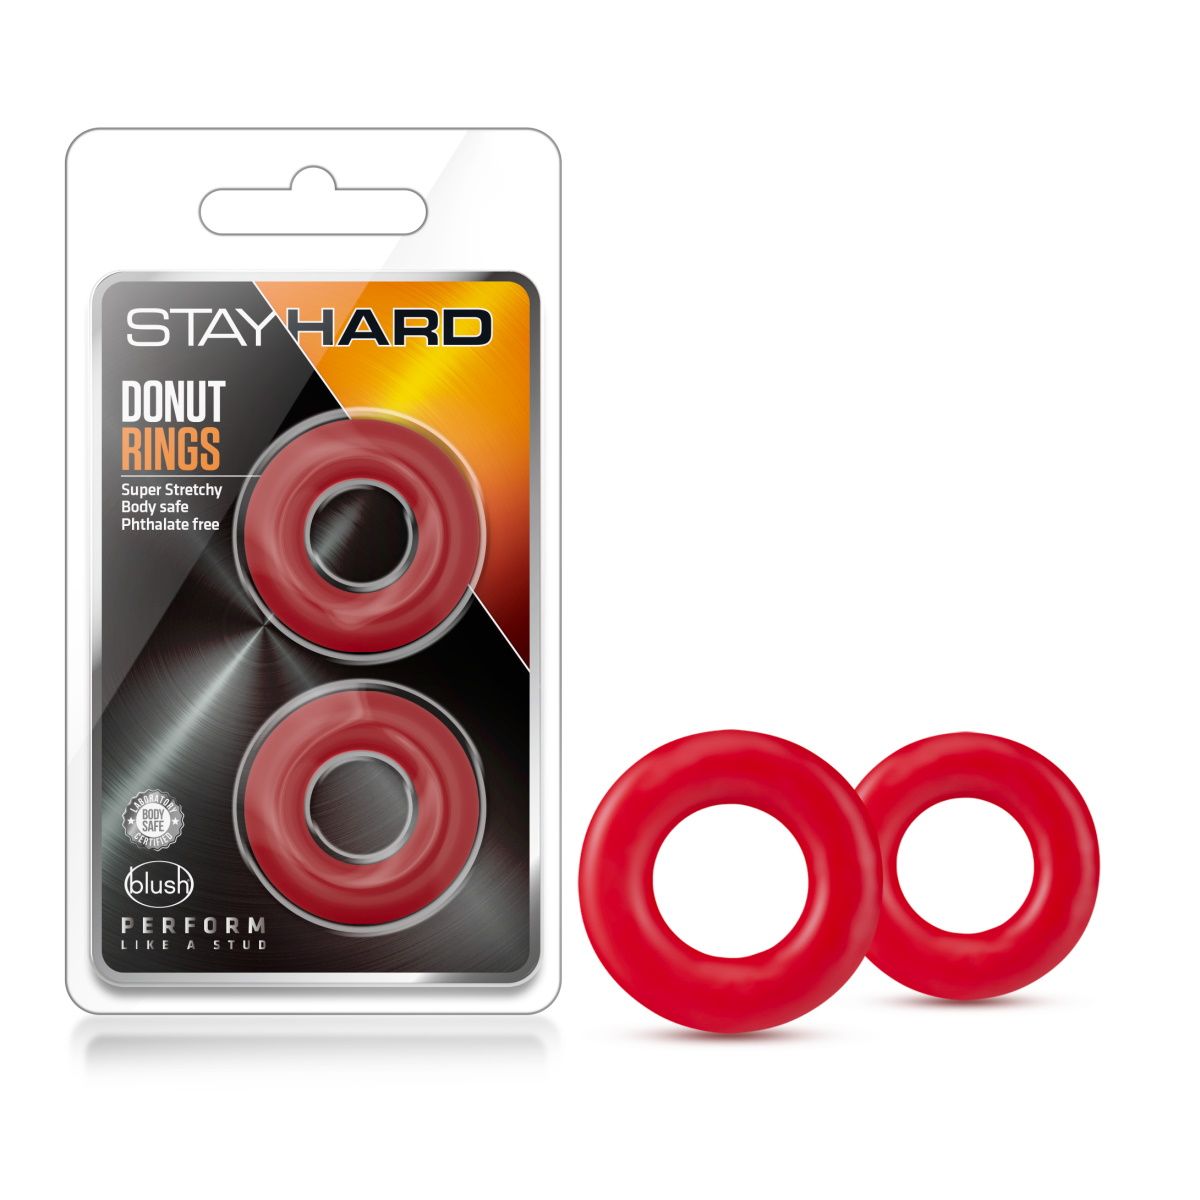   2    Stay Hard Donut Rings